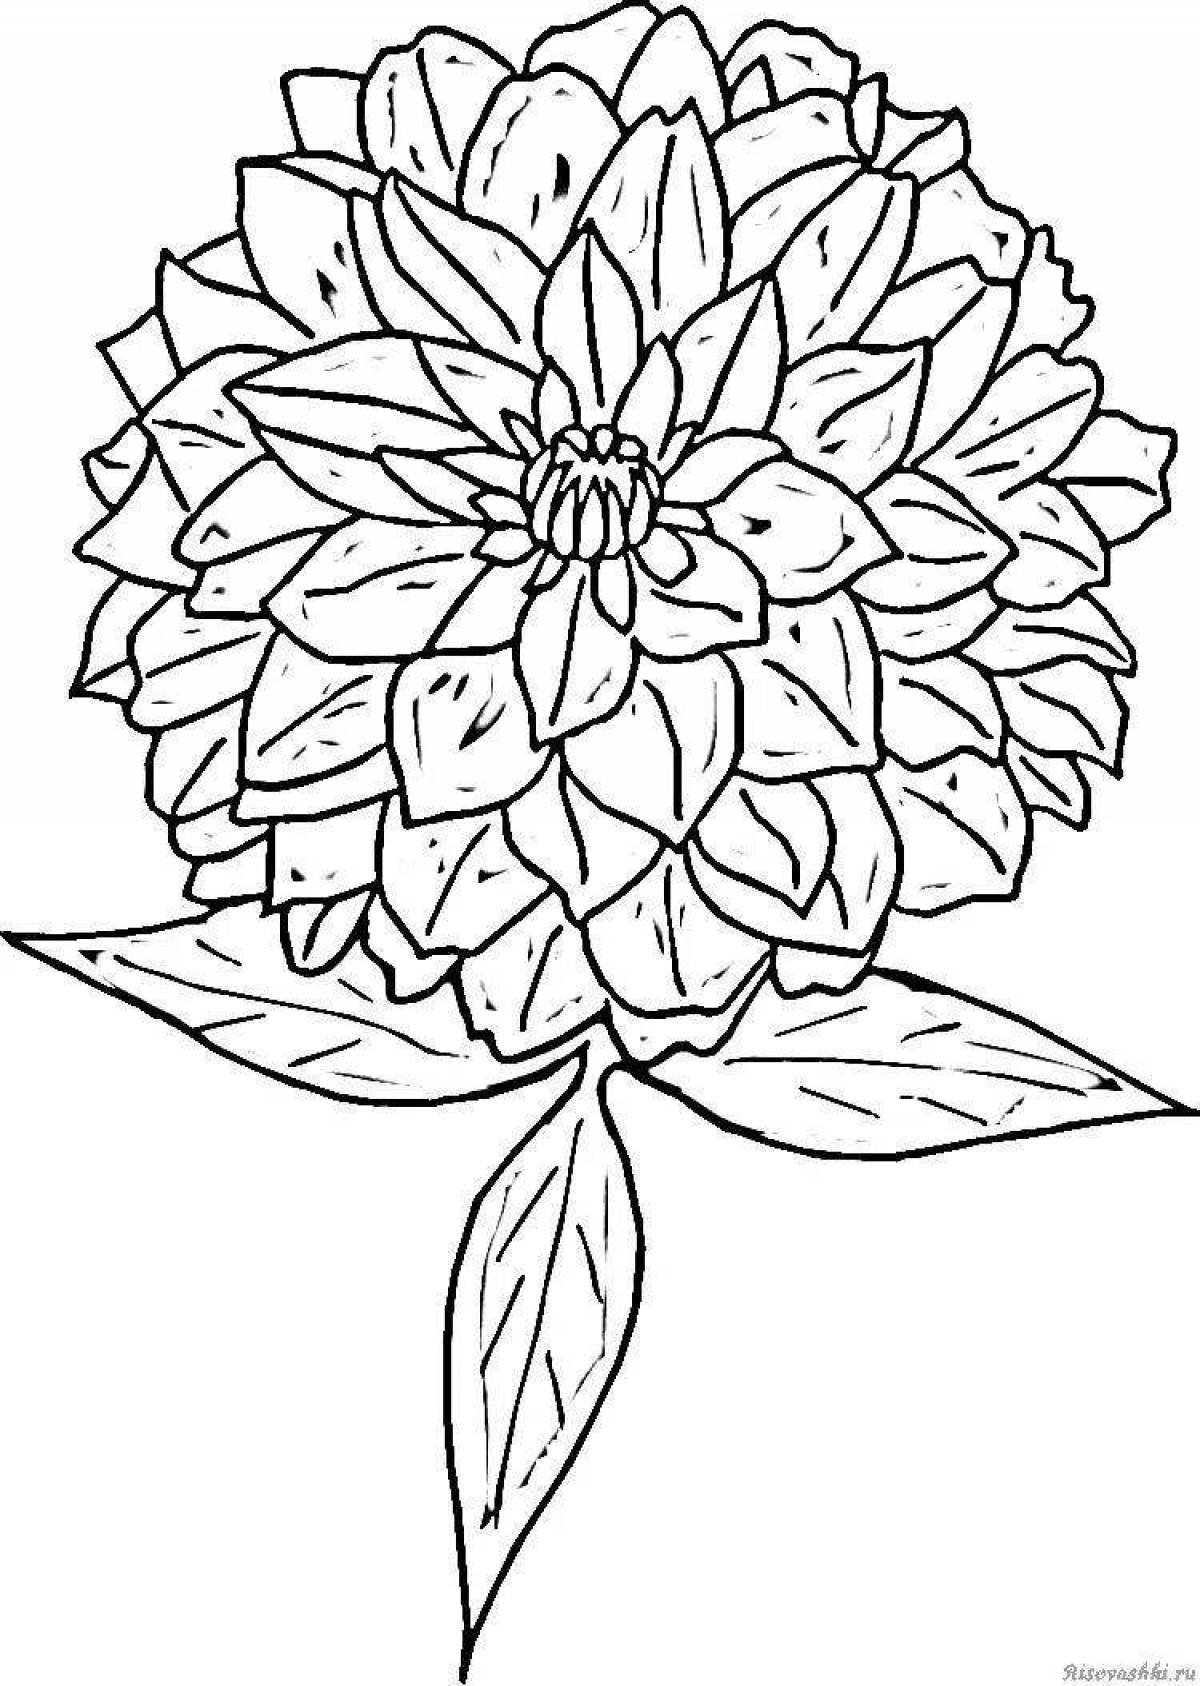 Cute stone flower coloring pages for kids